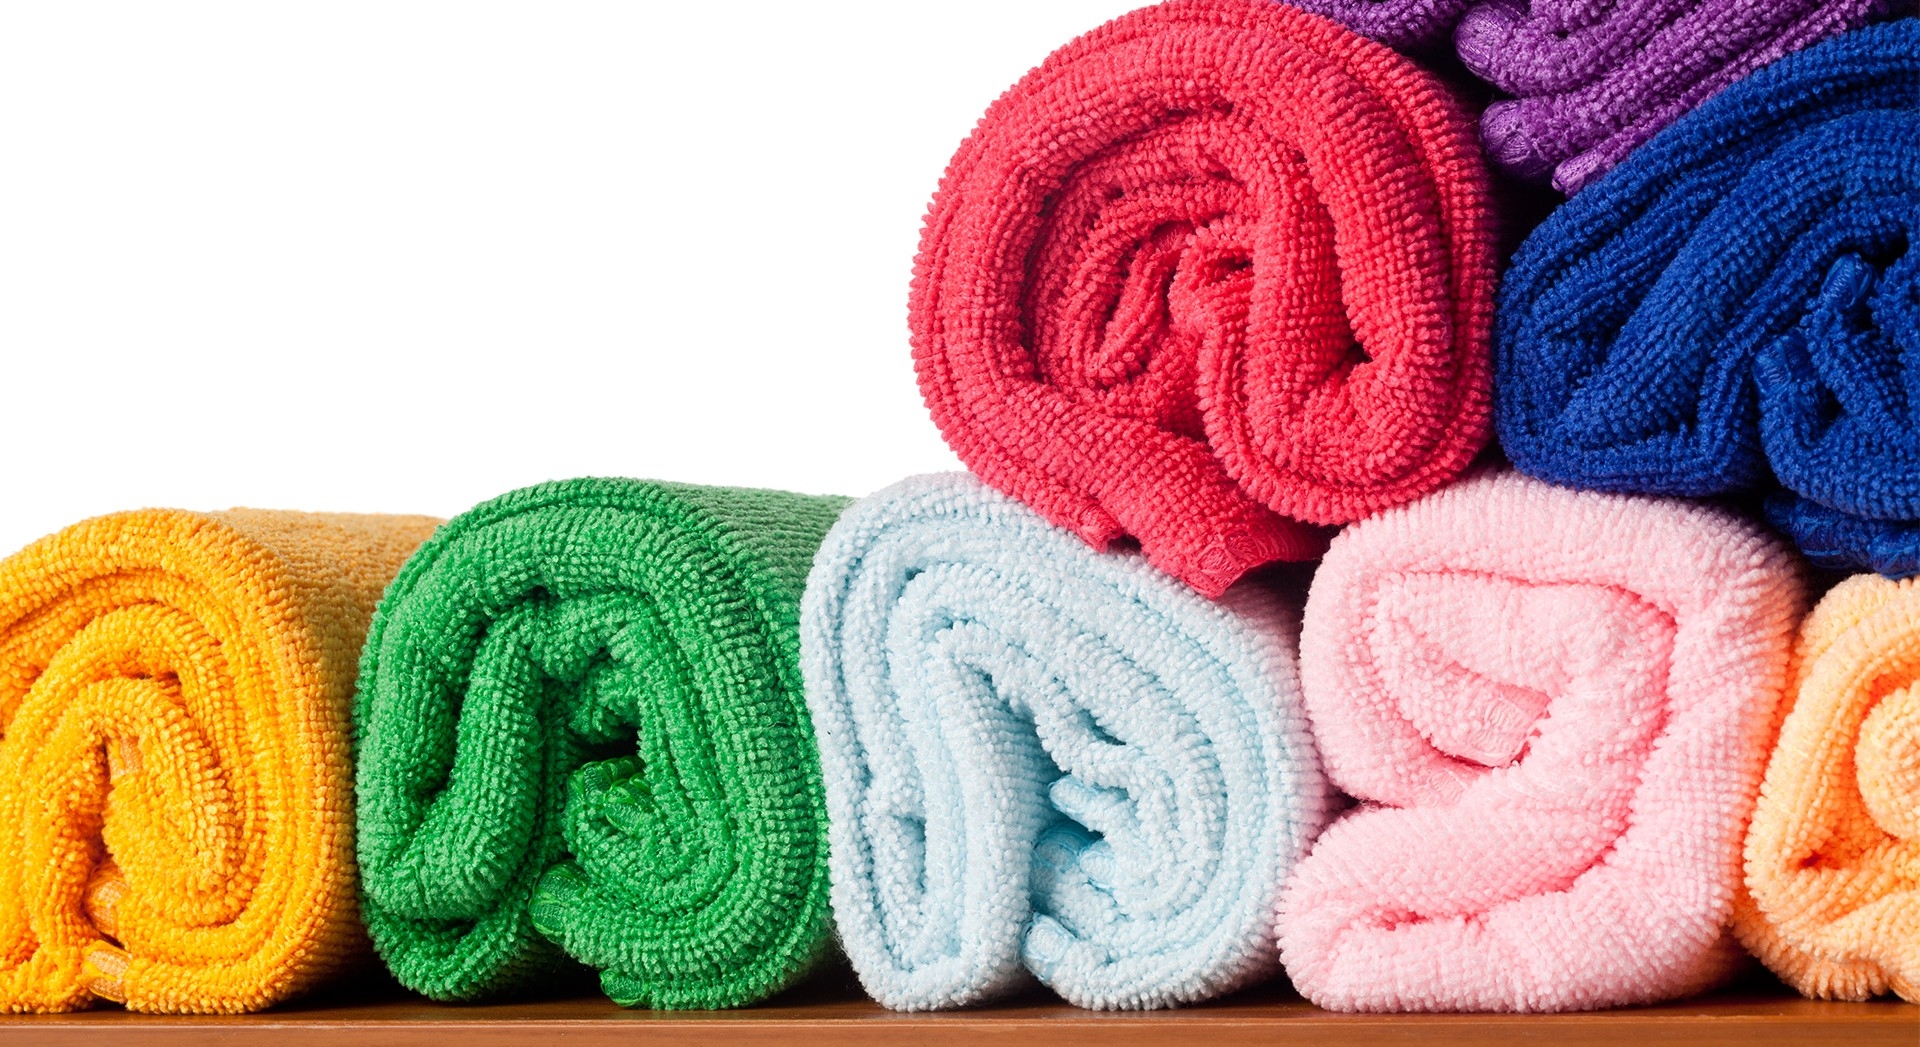 Microfiber. Is it the right choice for cleaning your home?